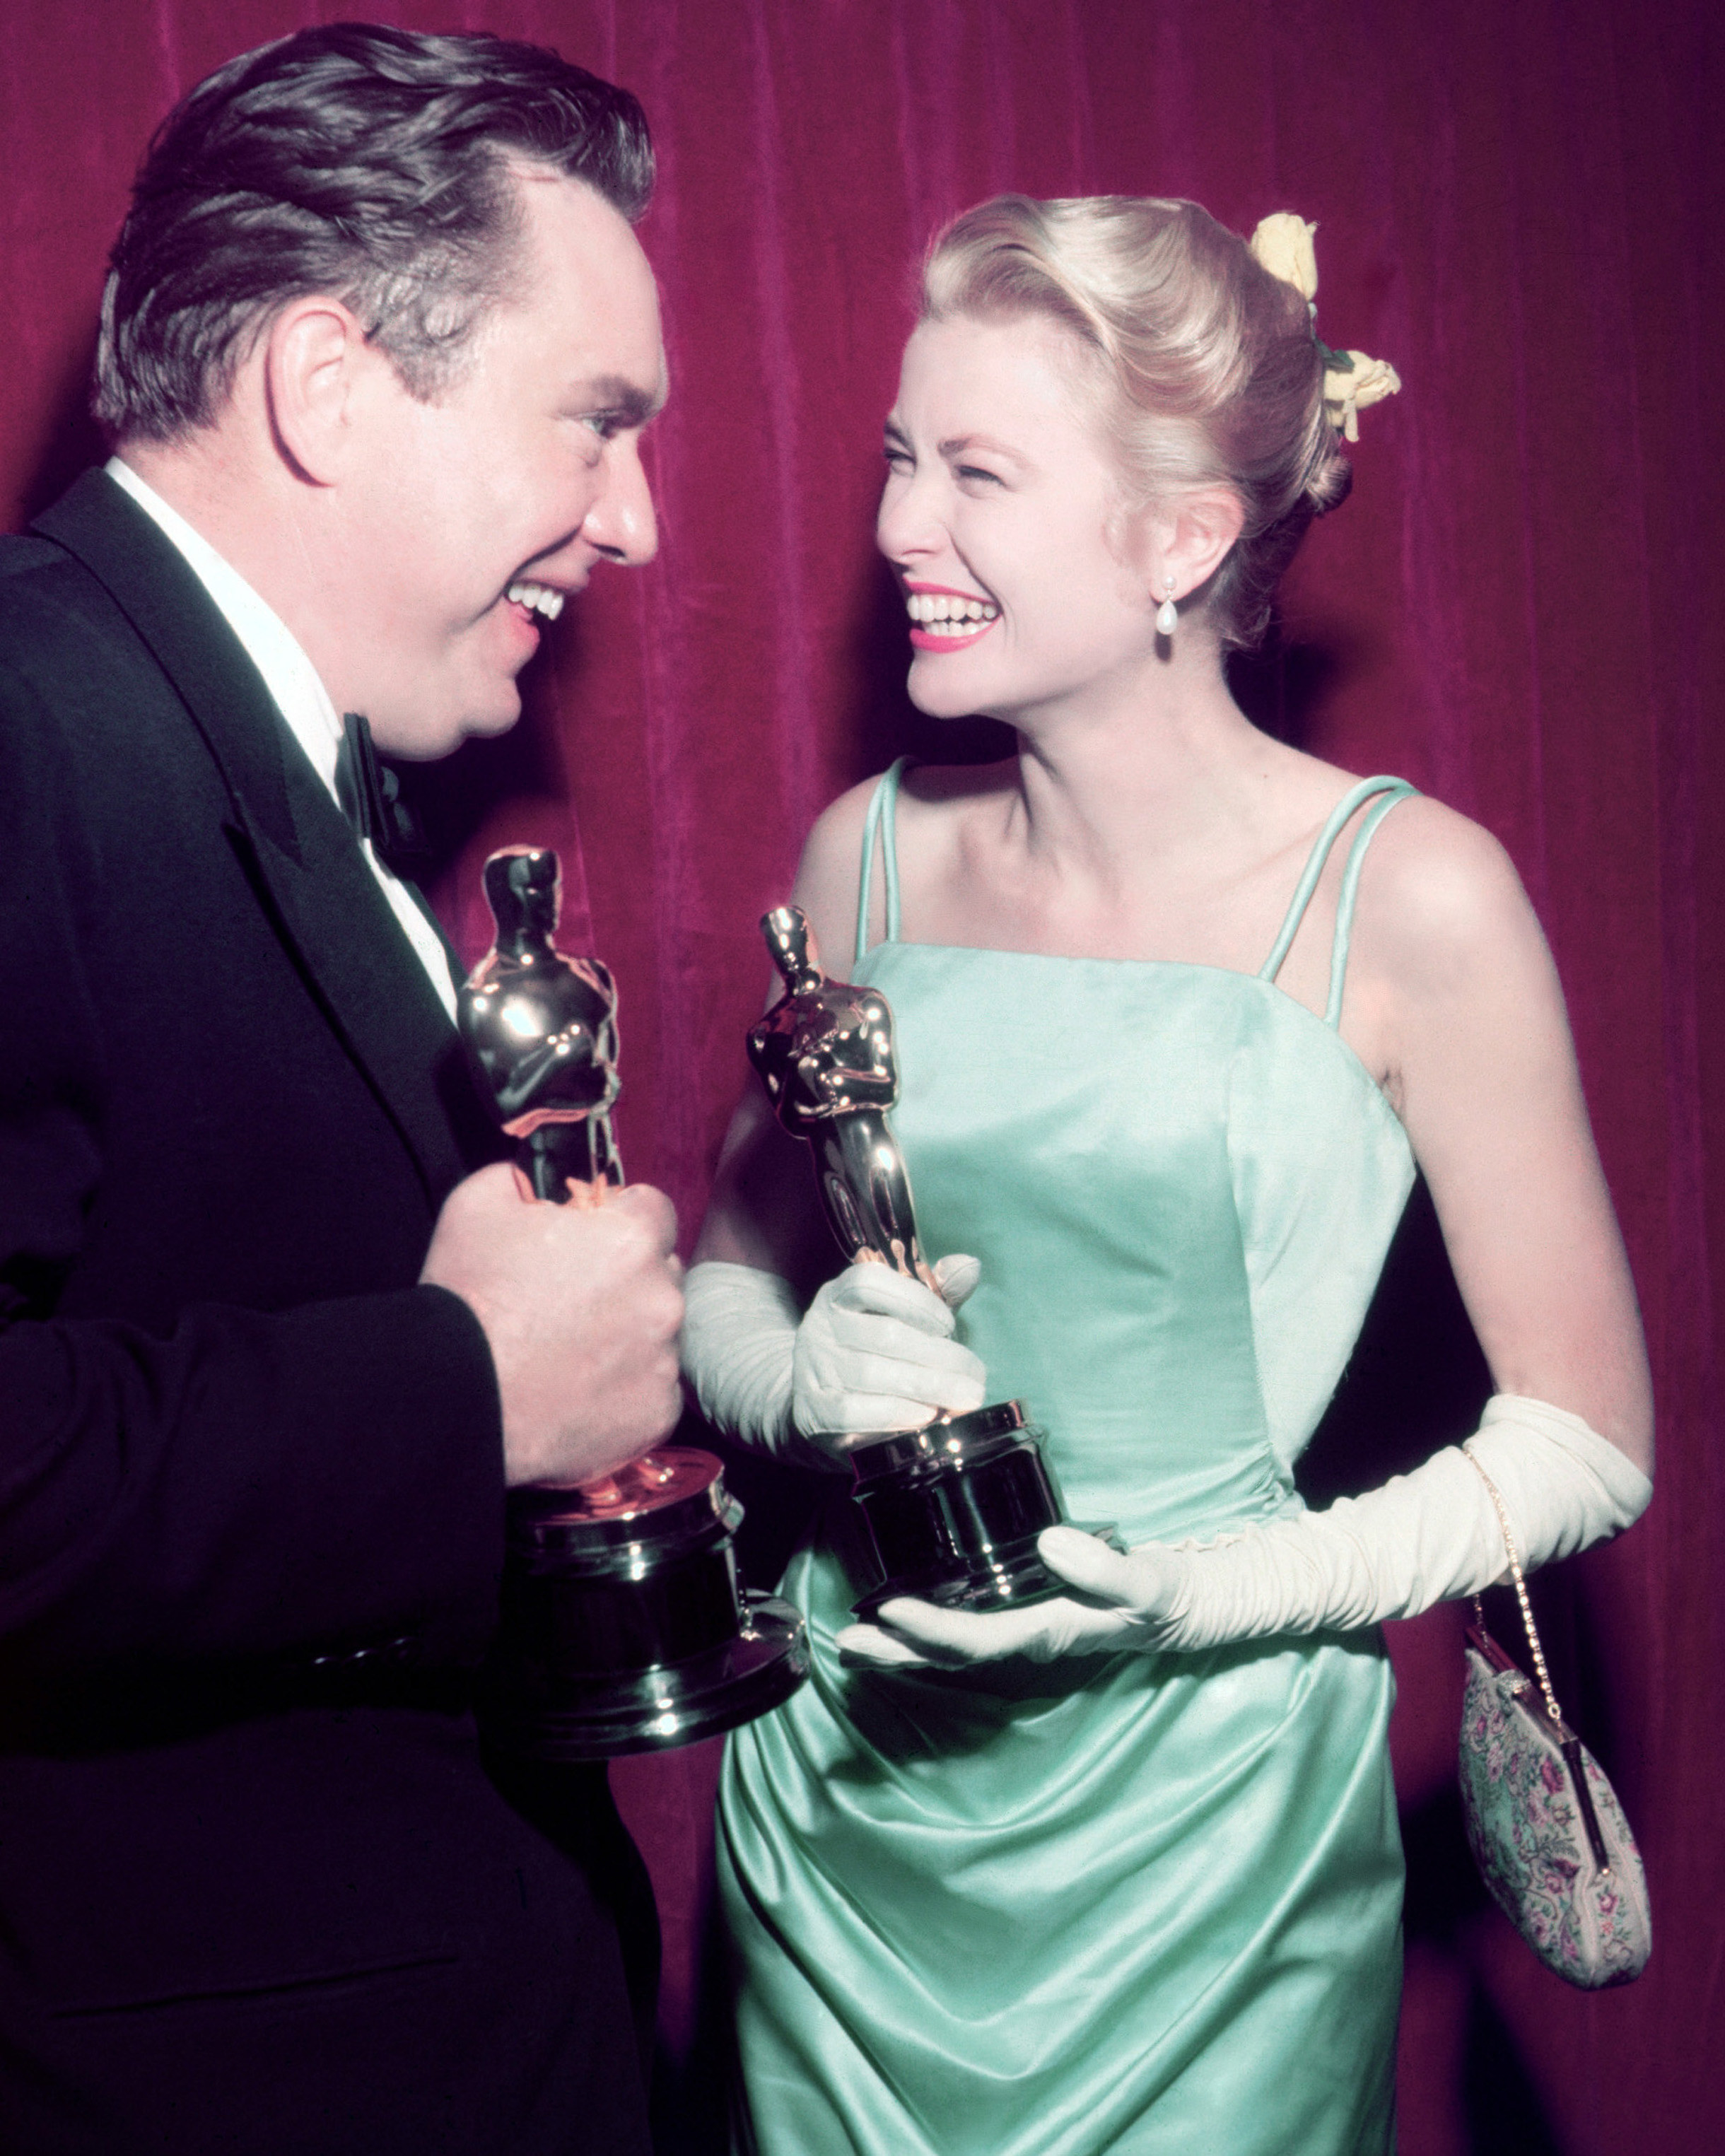 Kelly backstage with her Oscar